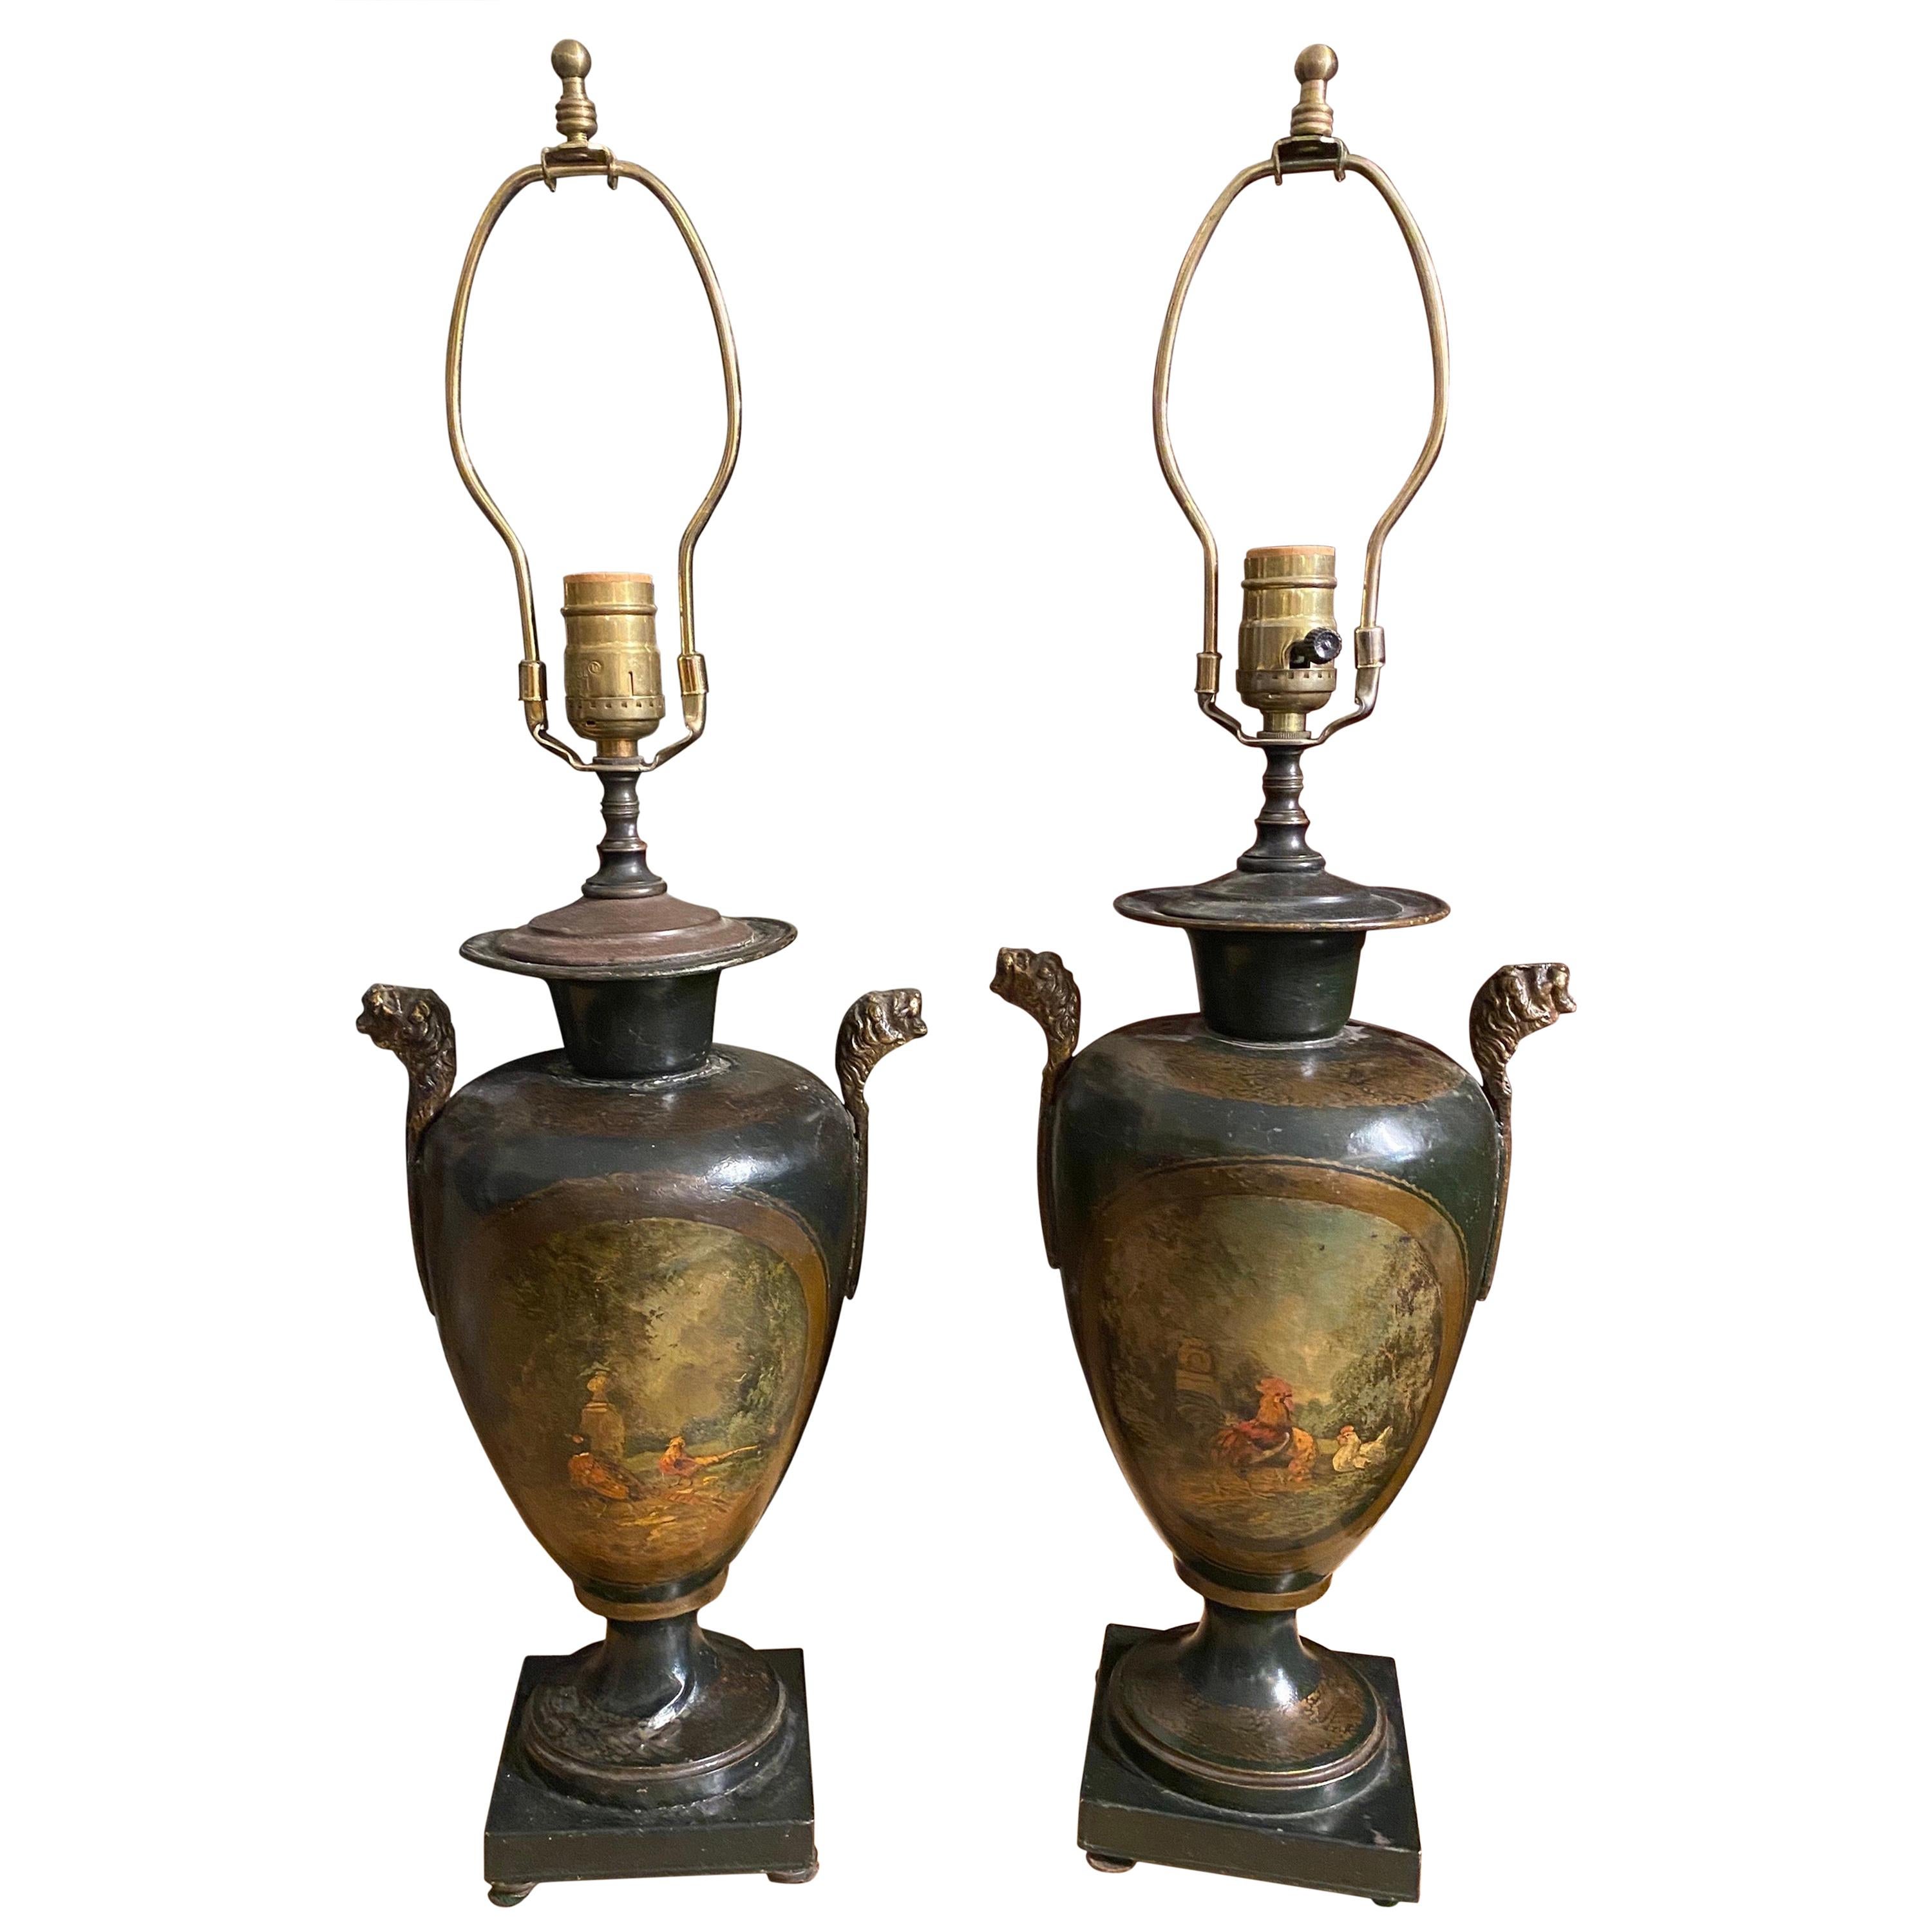 Pair of Polychrome Tole Lamps with Scenes of Pheasants and Chickens